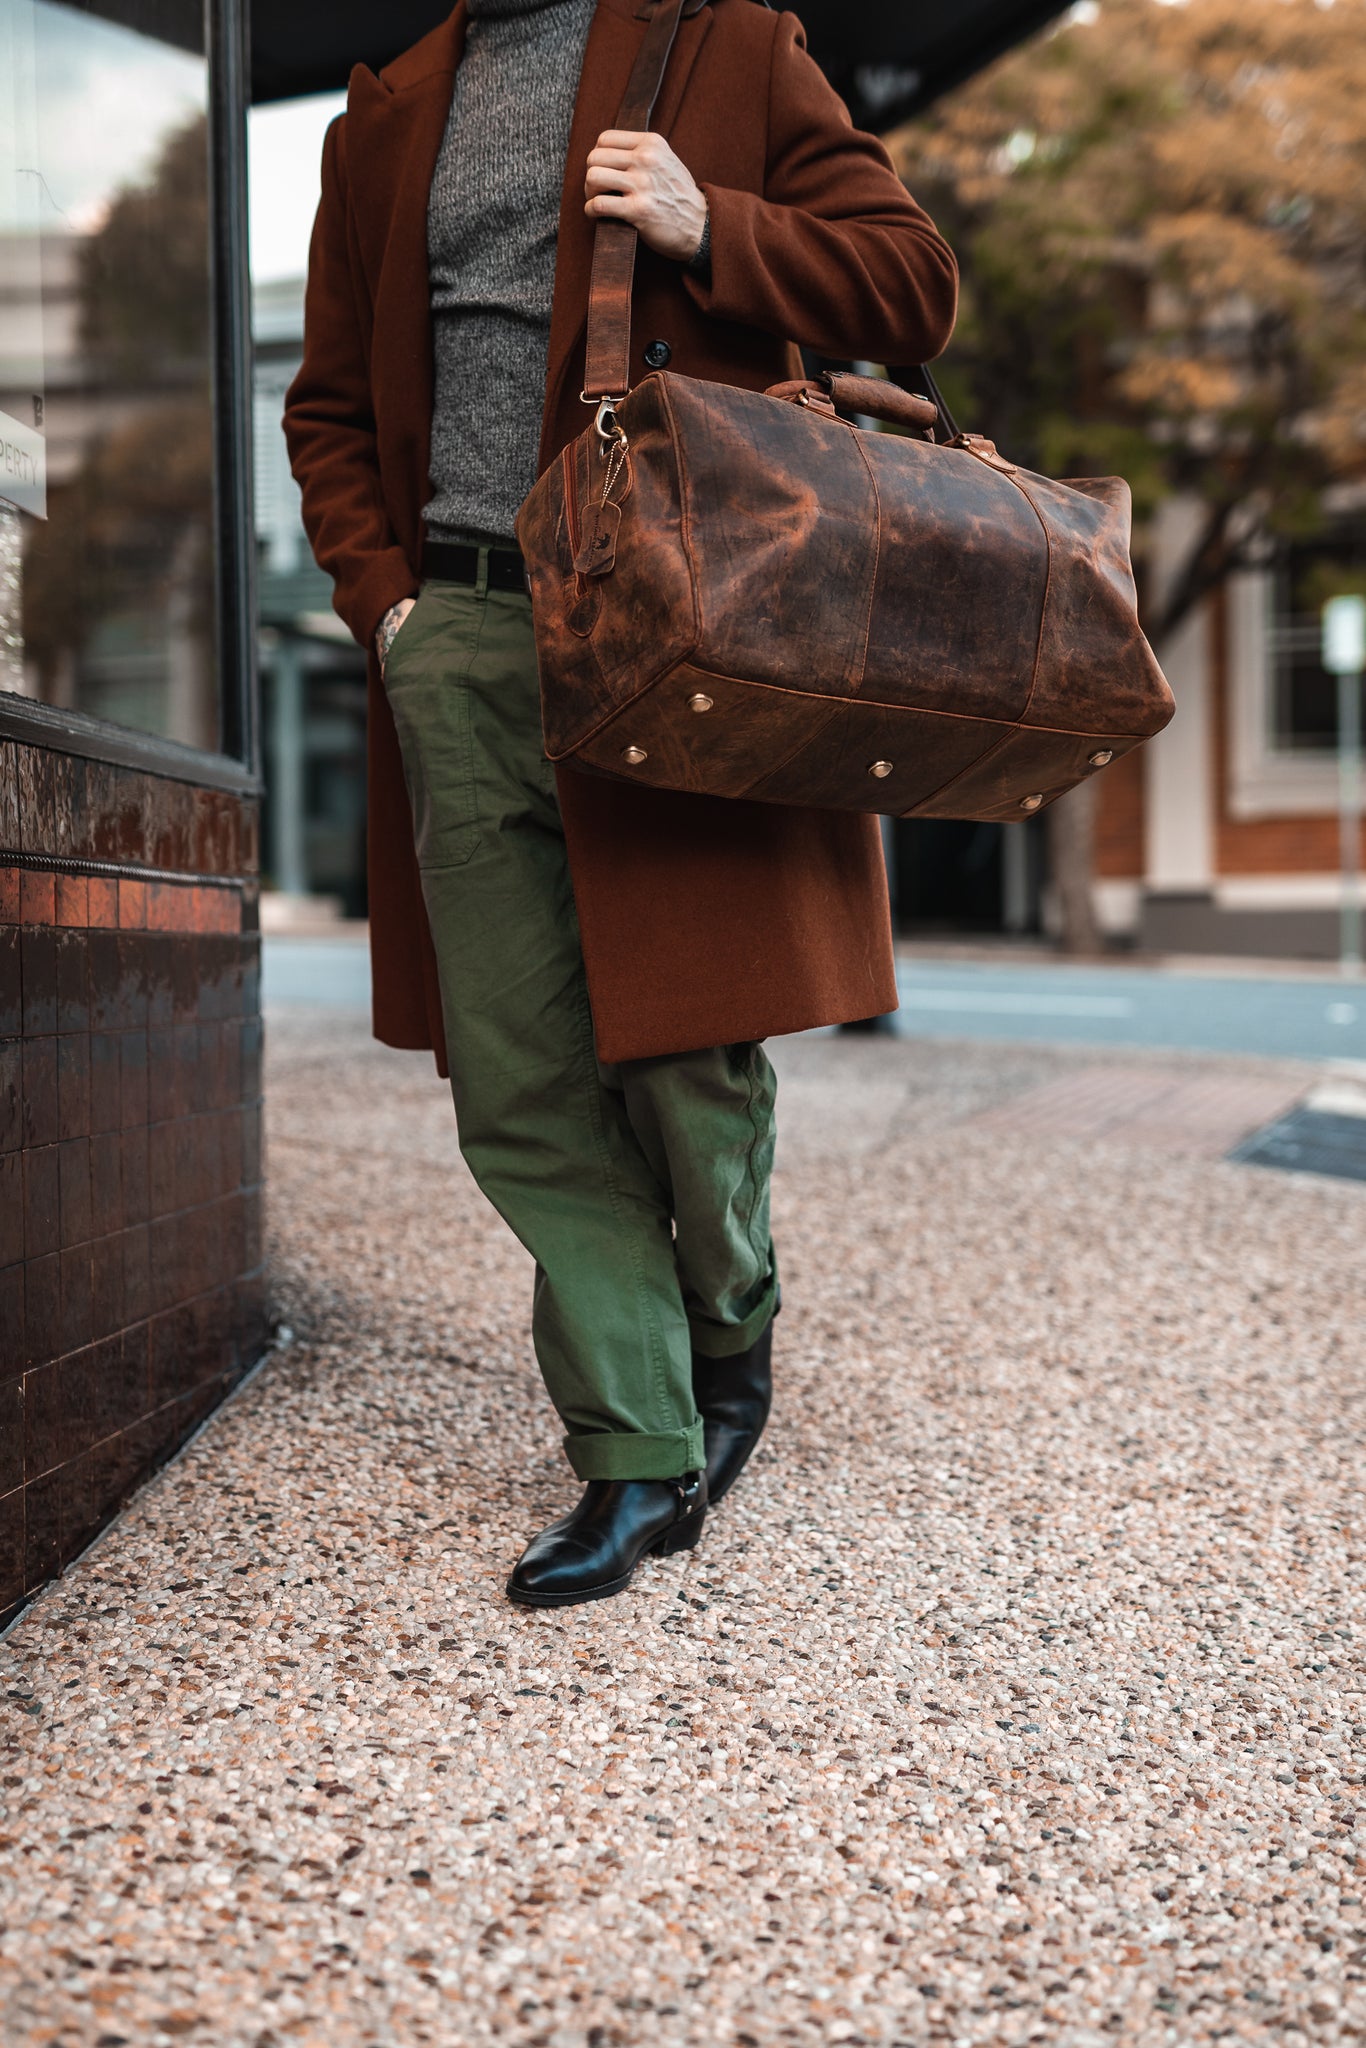 Discover our leather range of duffle bags, gym, and overnight weekend bags.